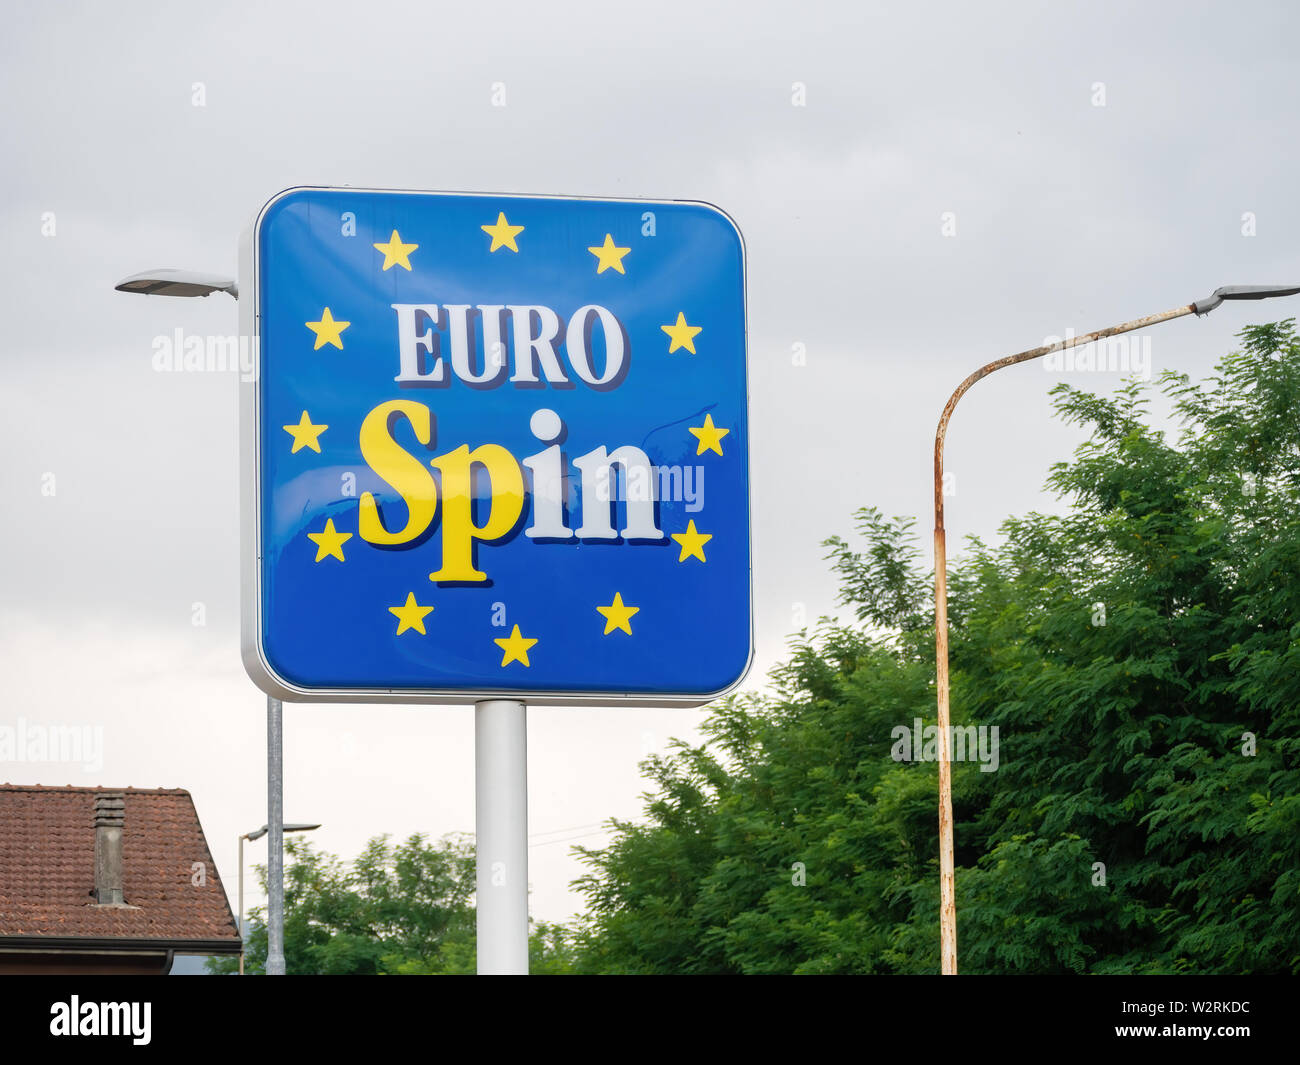 AULLA, MASSA CARRARA, ITALY - JULY 10, 2019: Eurospin discount store sign with logo. The chain is currently expanding in Italy and is also in Slovenia Stock Photo